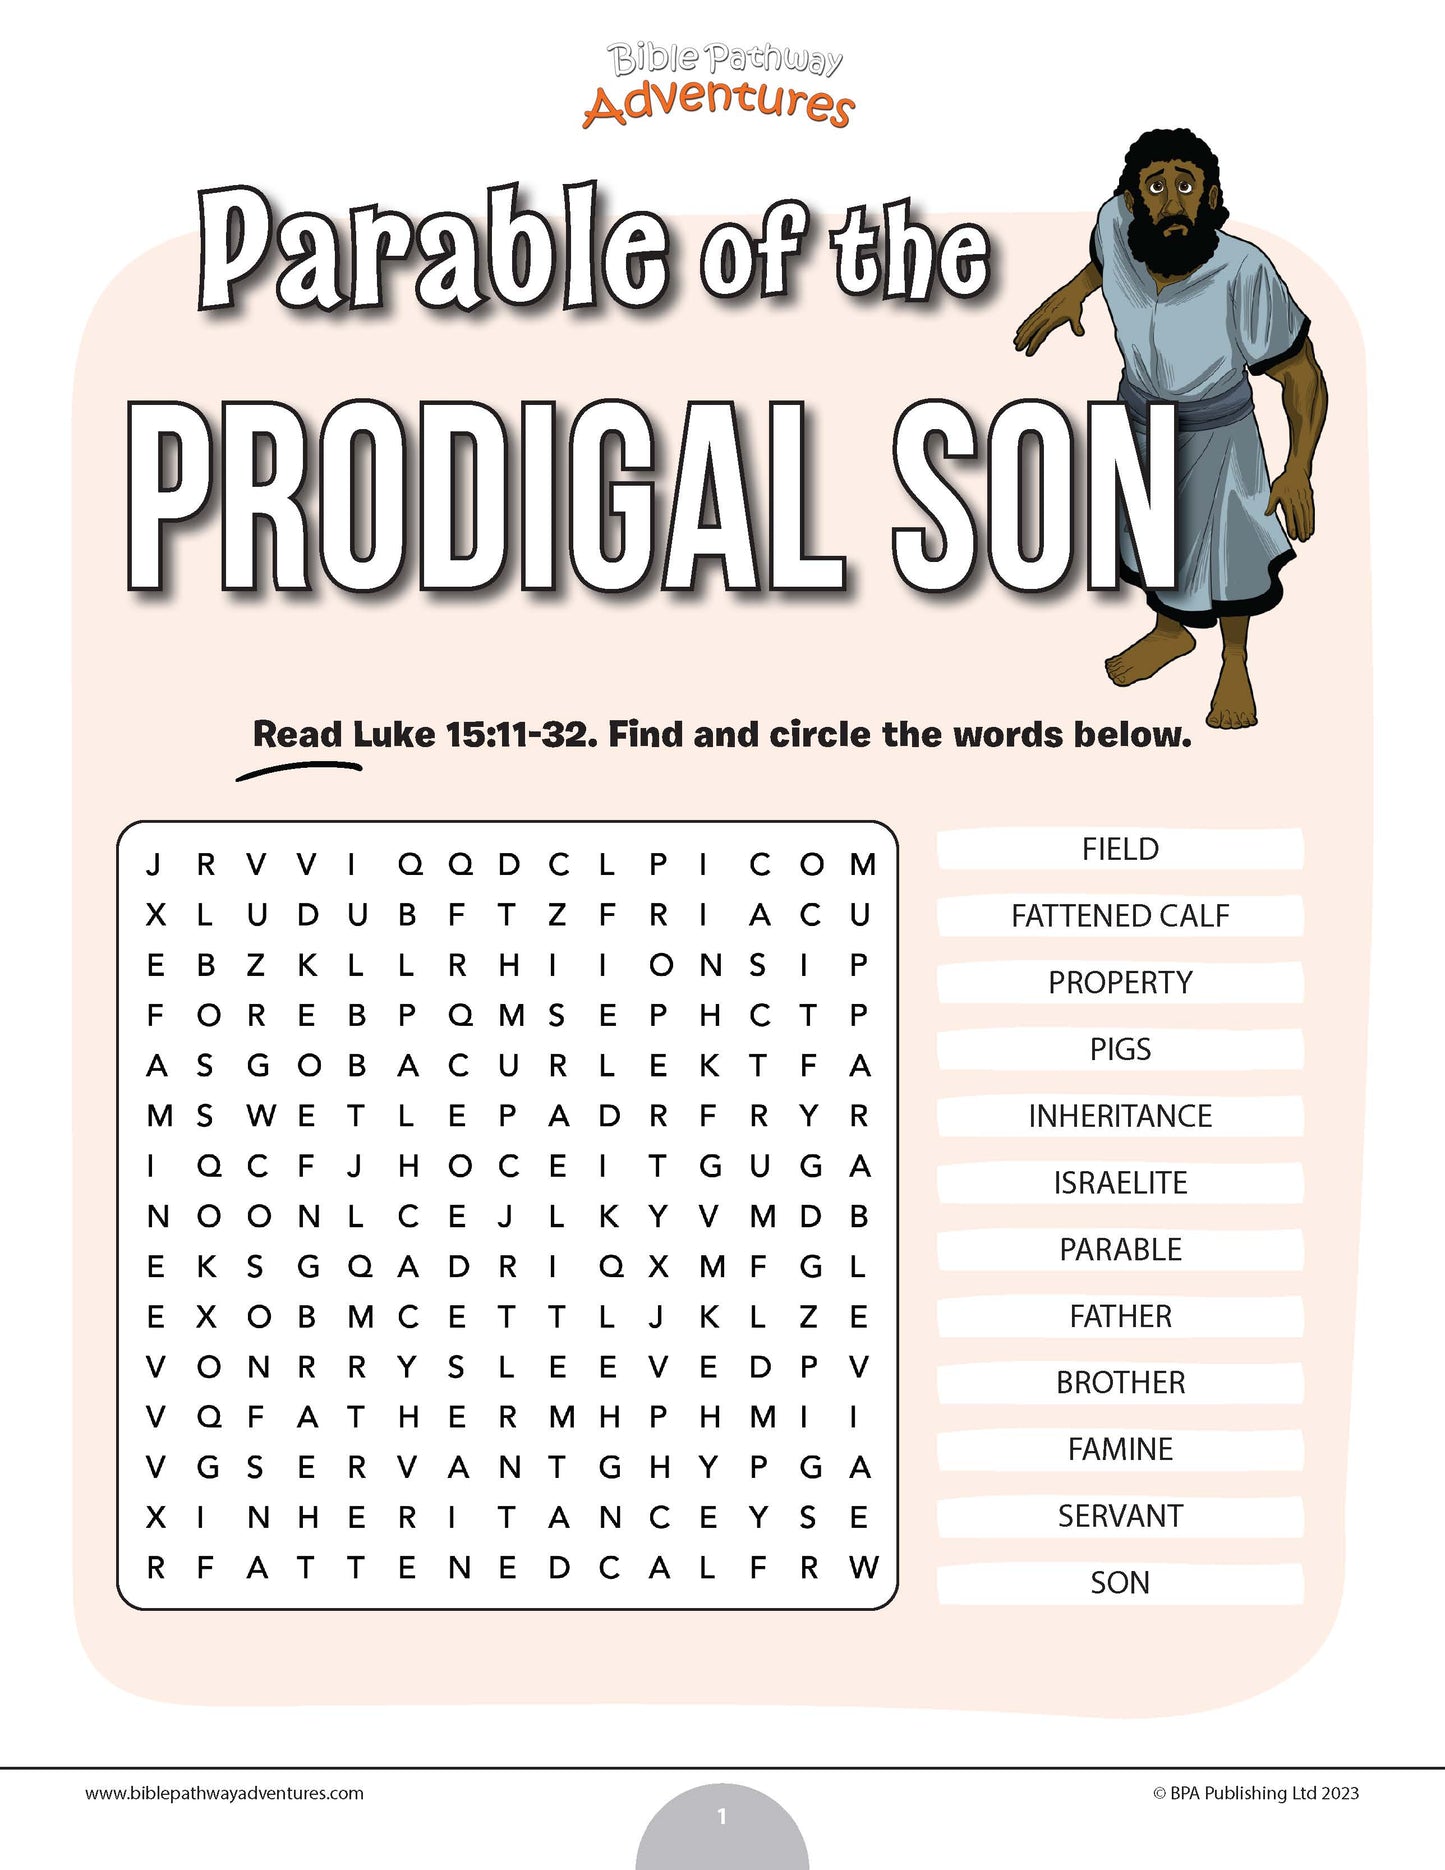 Parable of the Prodigal Son word search